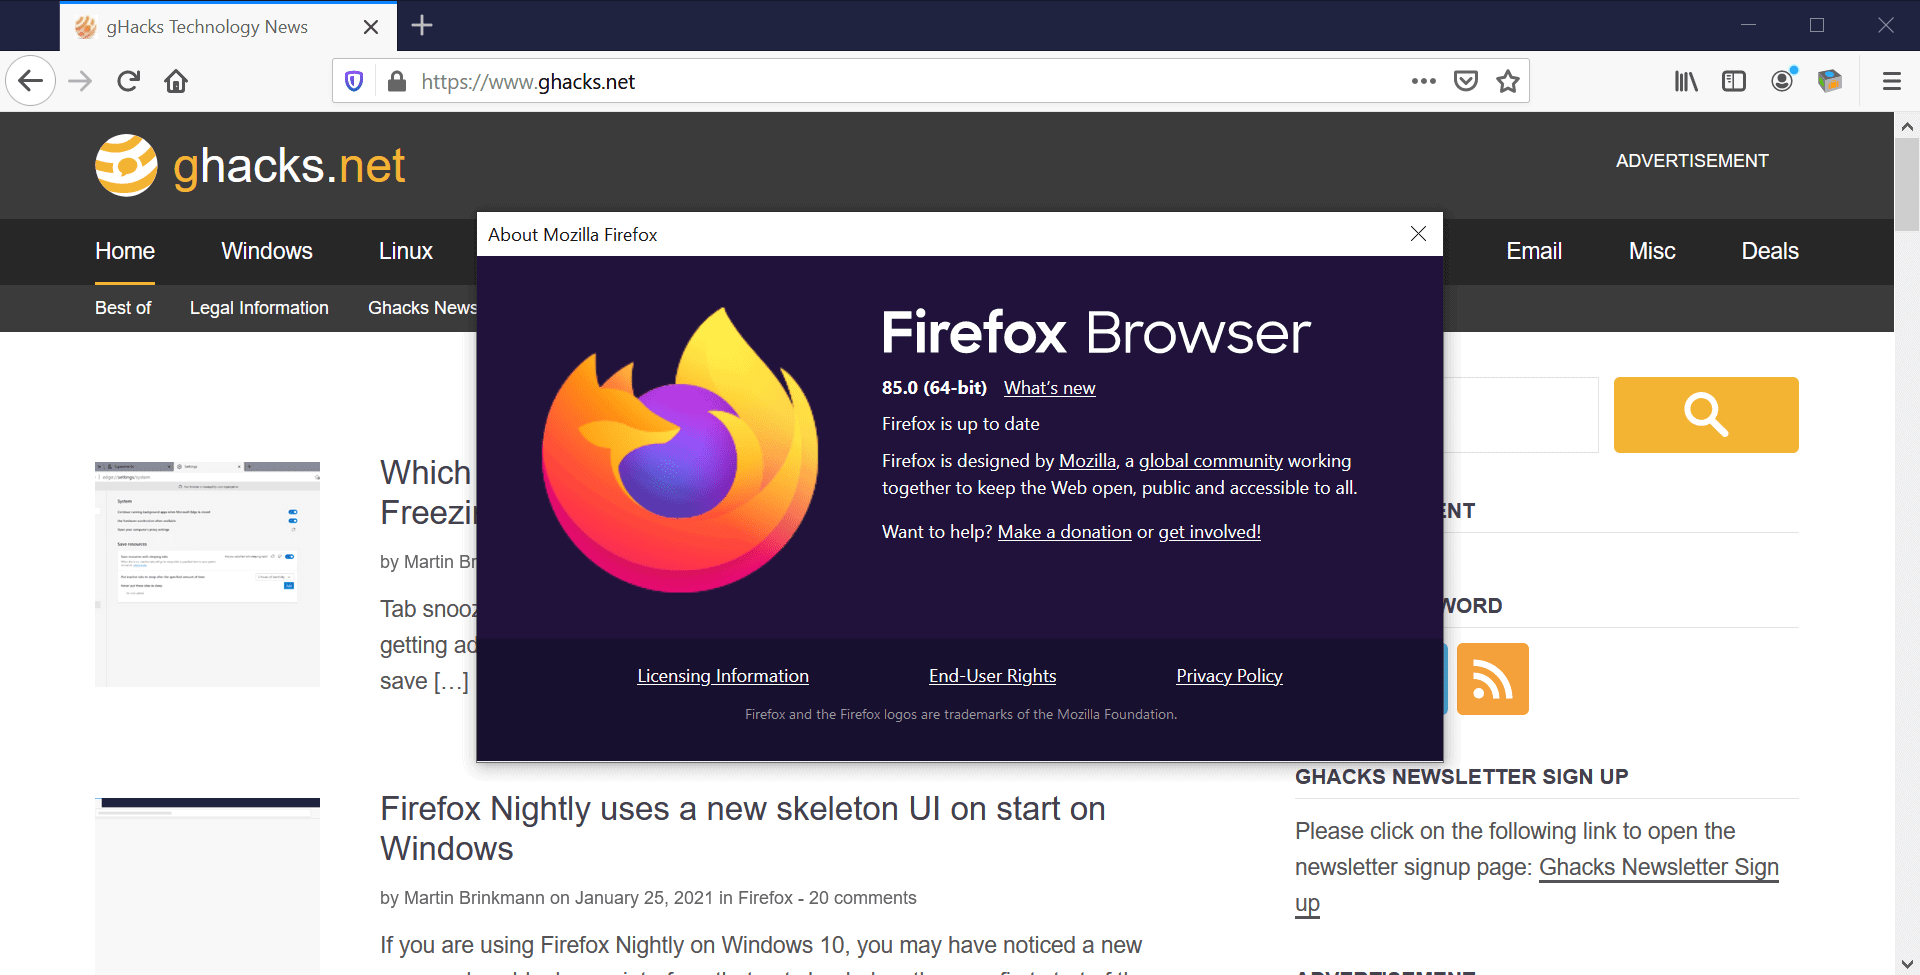 Here is what is new and changed in Firefox 85.0